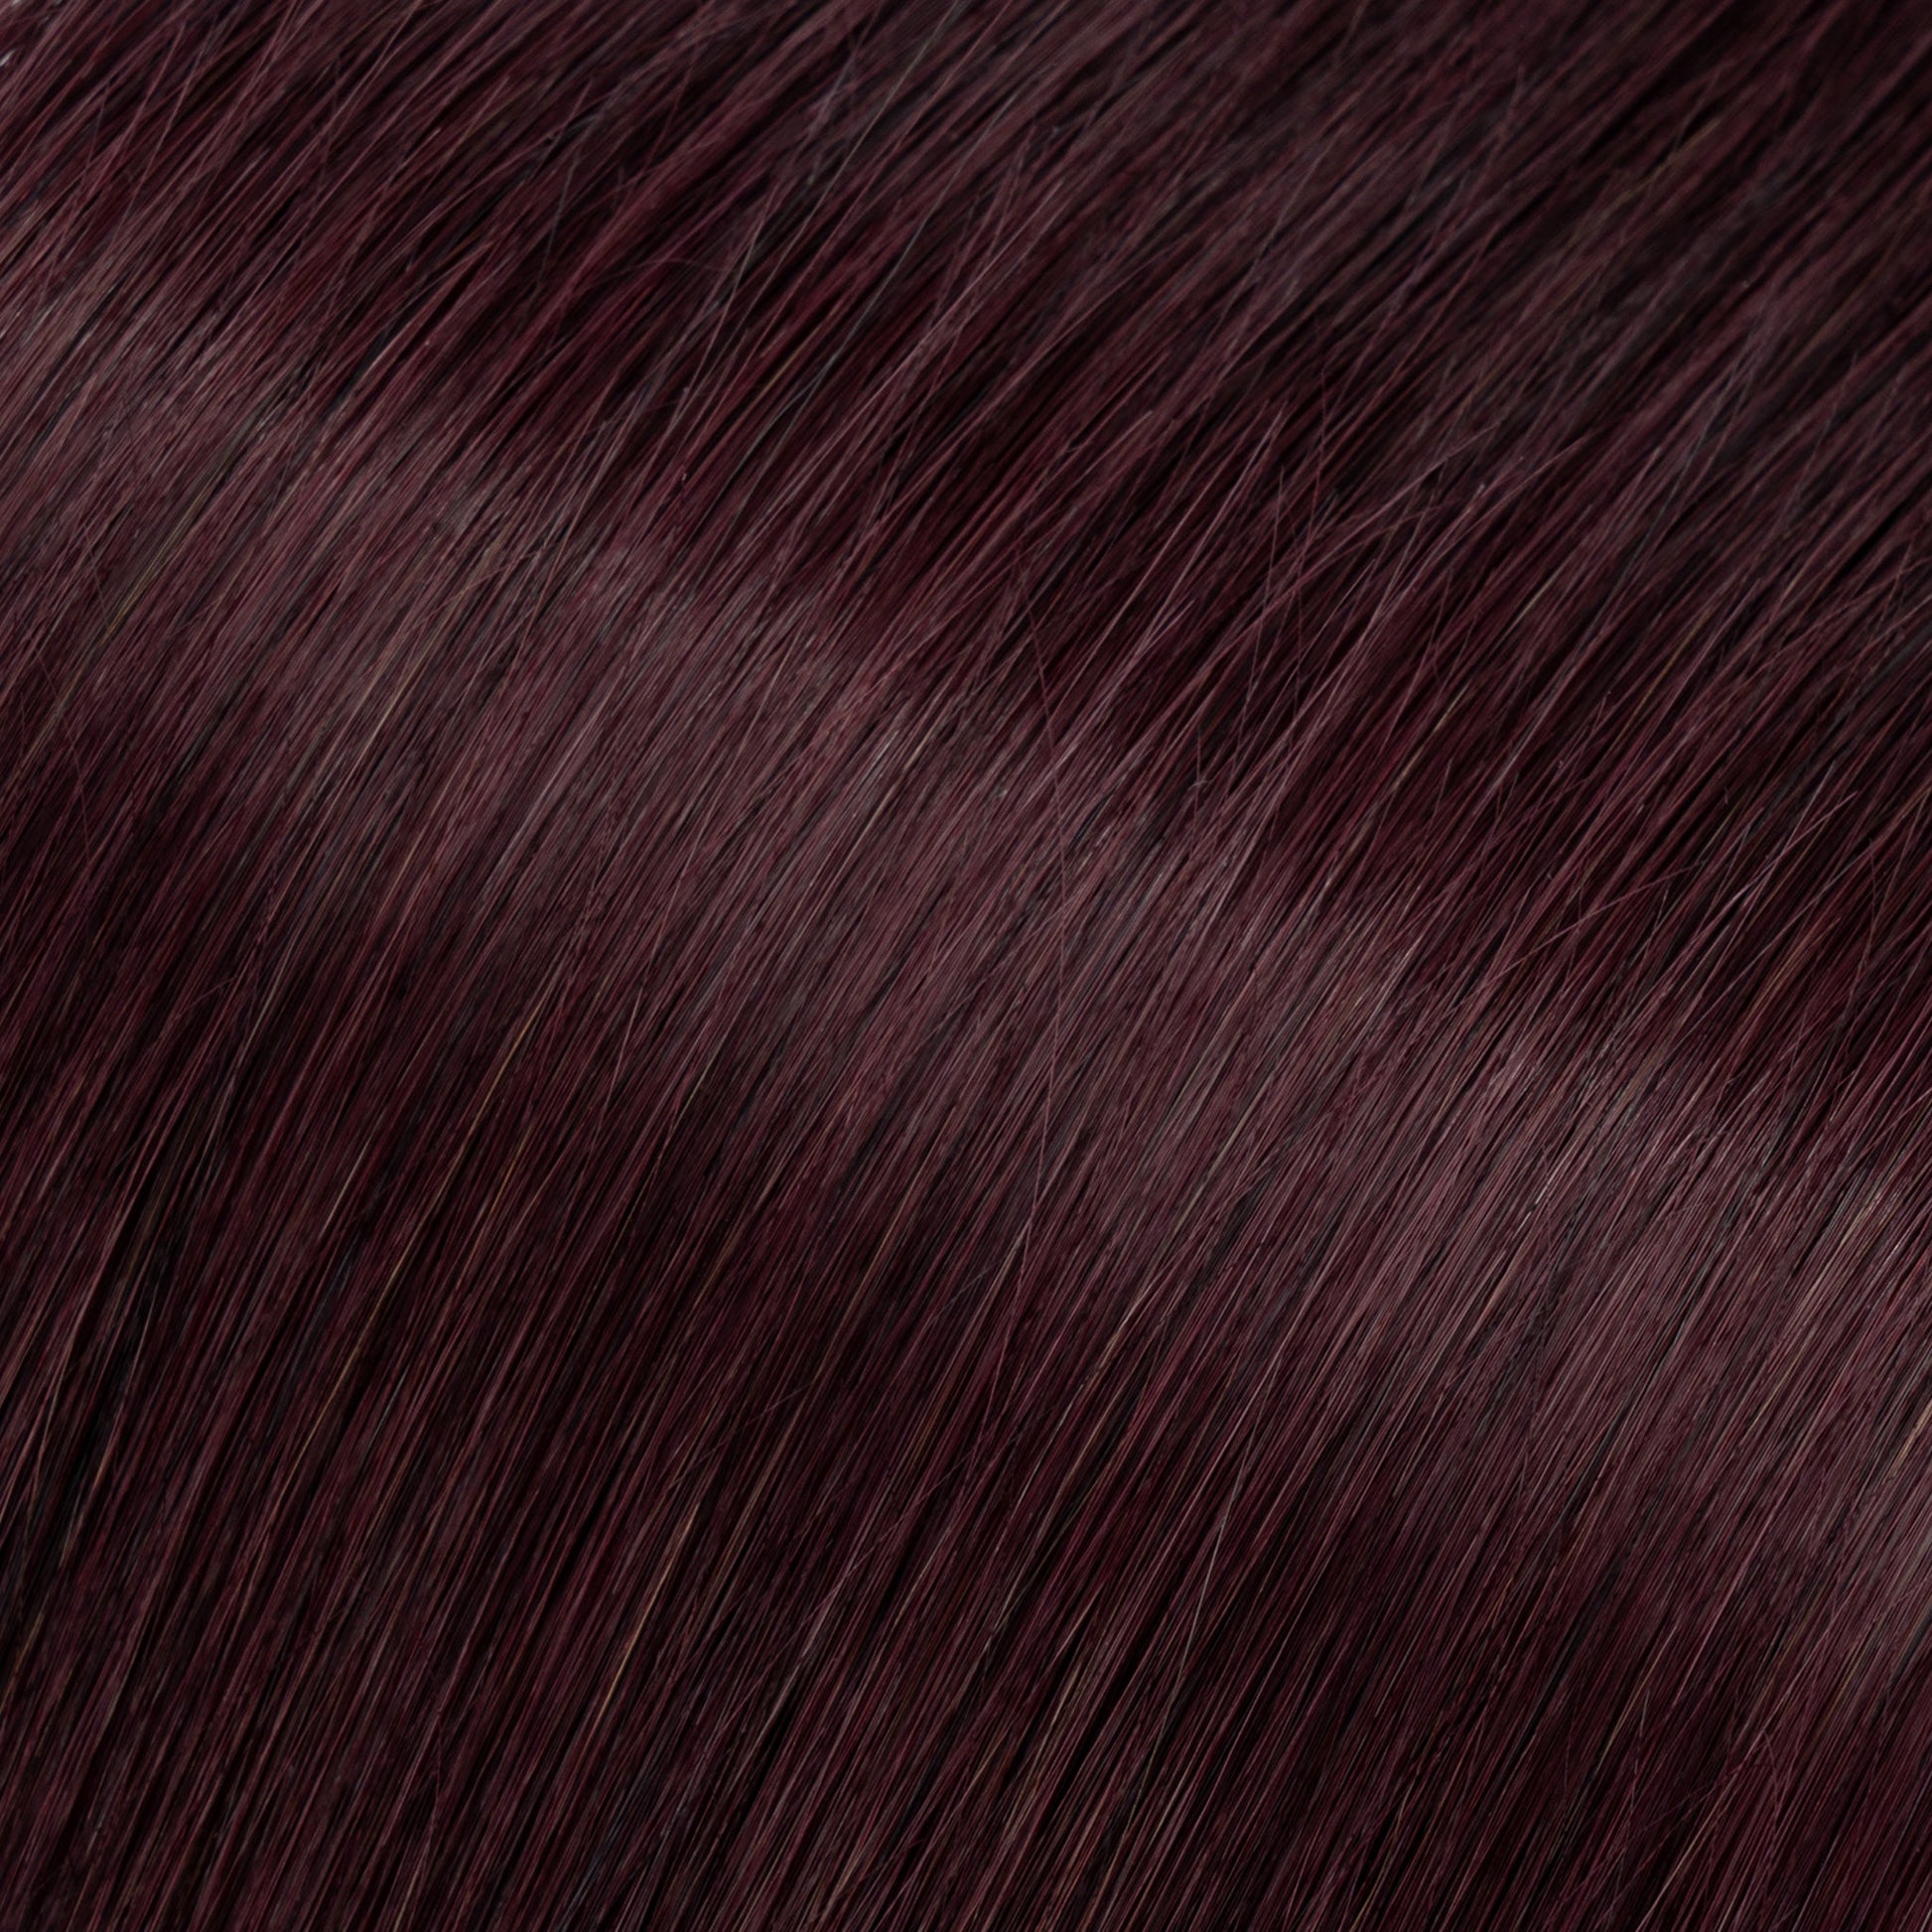 Burgundy Color Tape In Hair Extensions Invisible Weft 20 PCS segohair.com